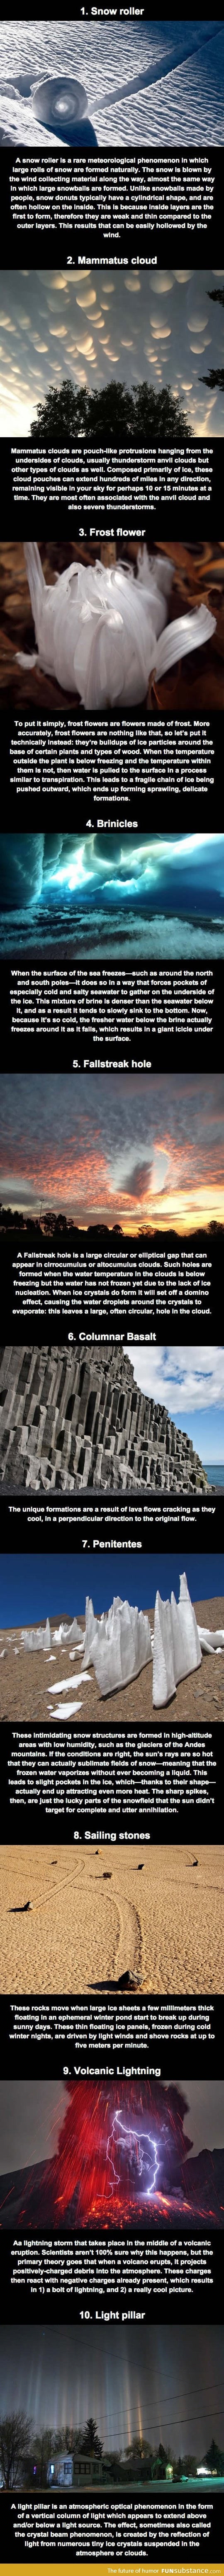 Some awesomely cool natural phenomena